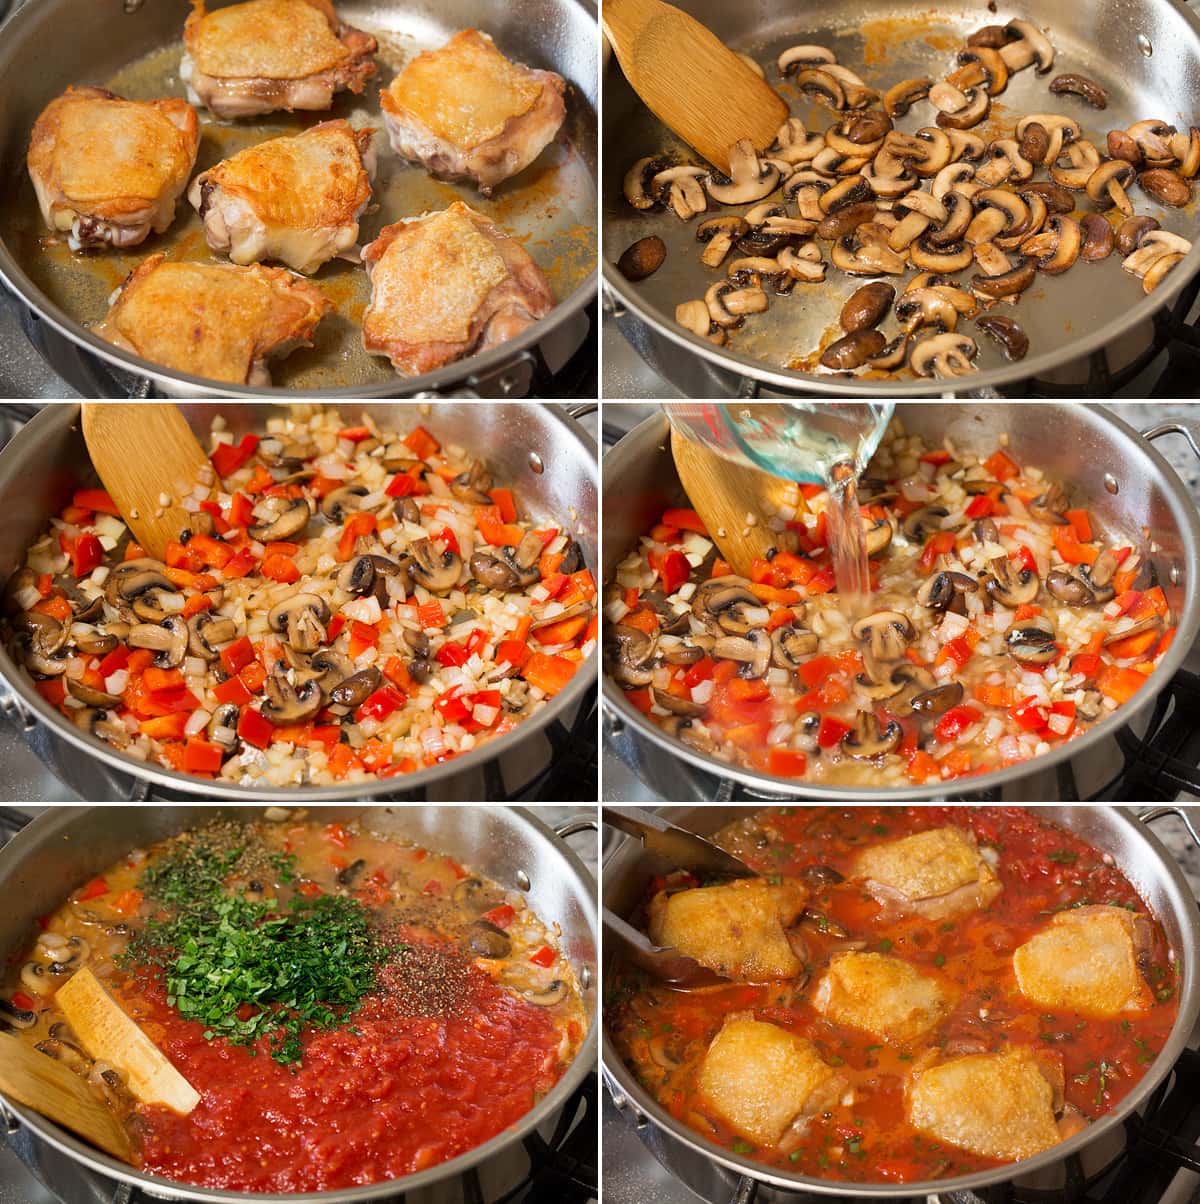 Collage of six photos showing steps of making chicken cacciatore in a saute pan on the stovetop.